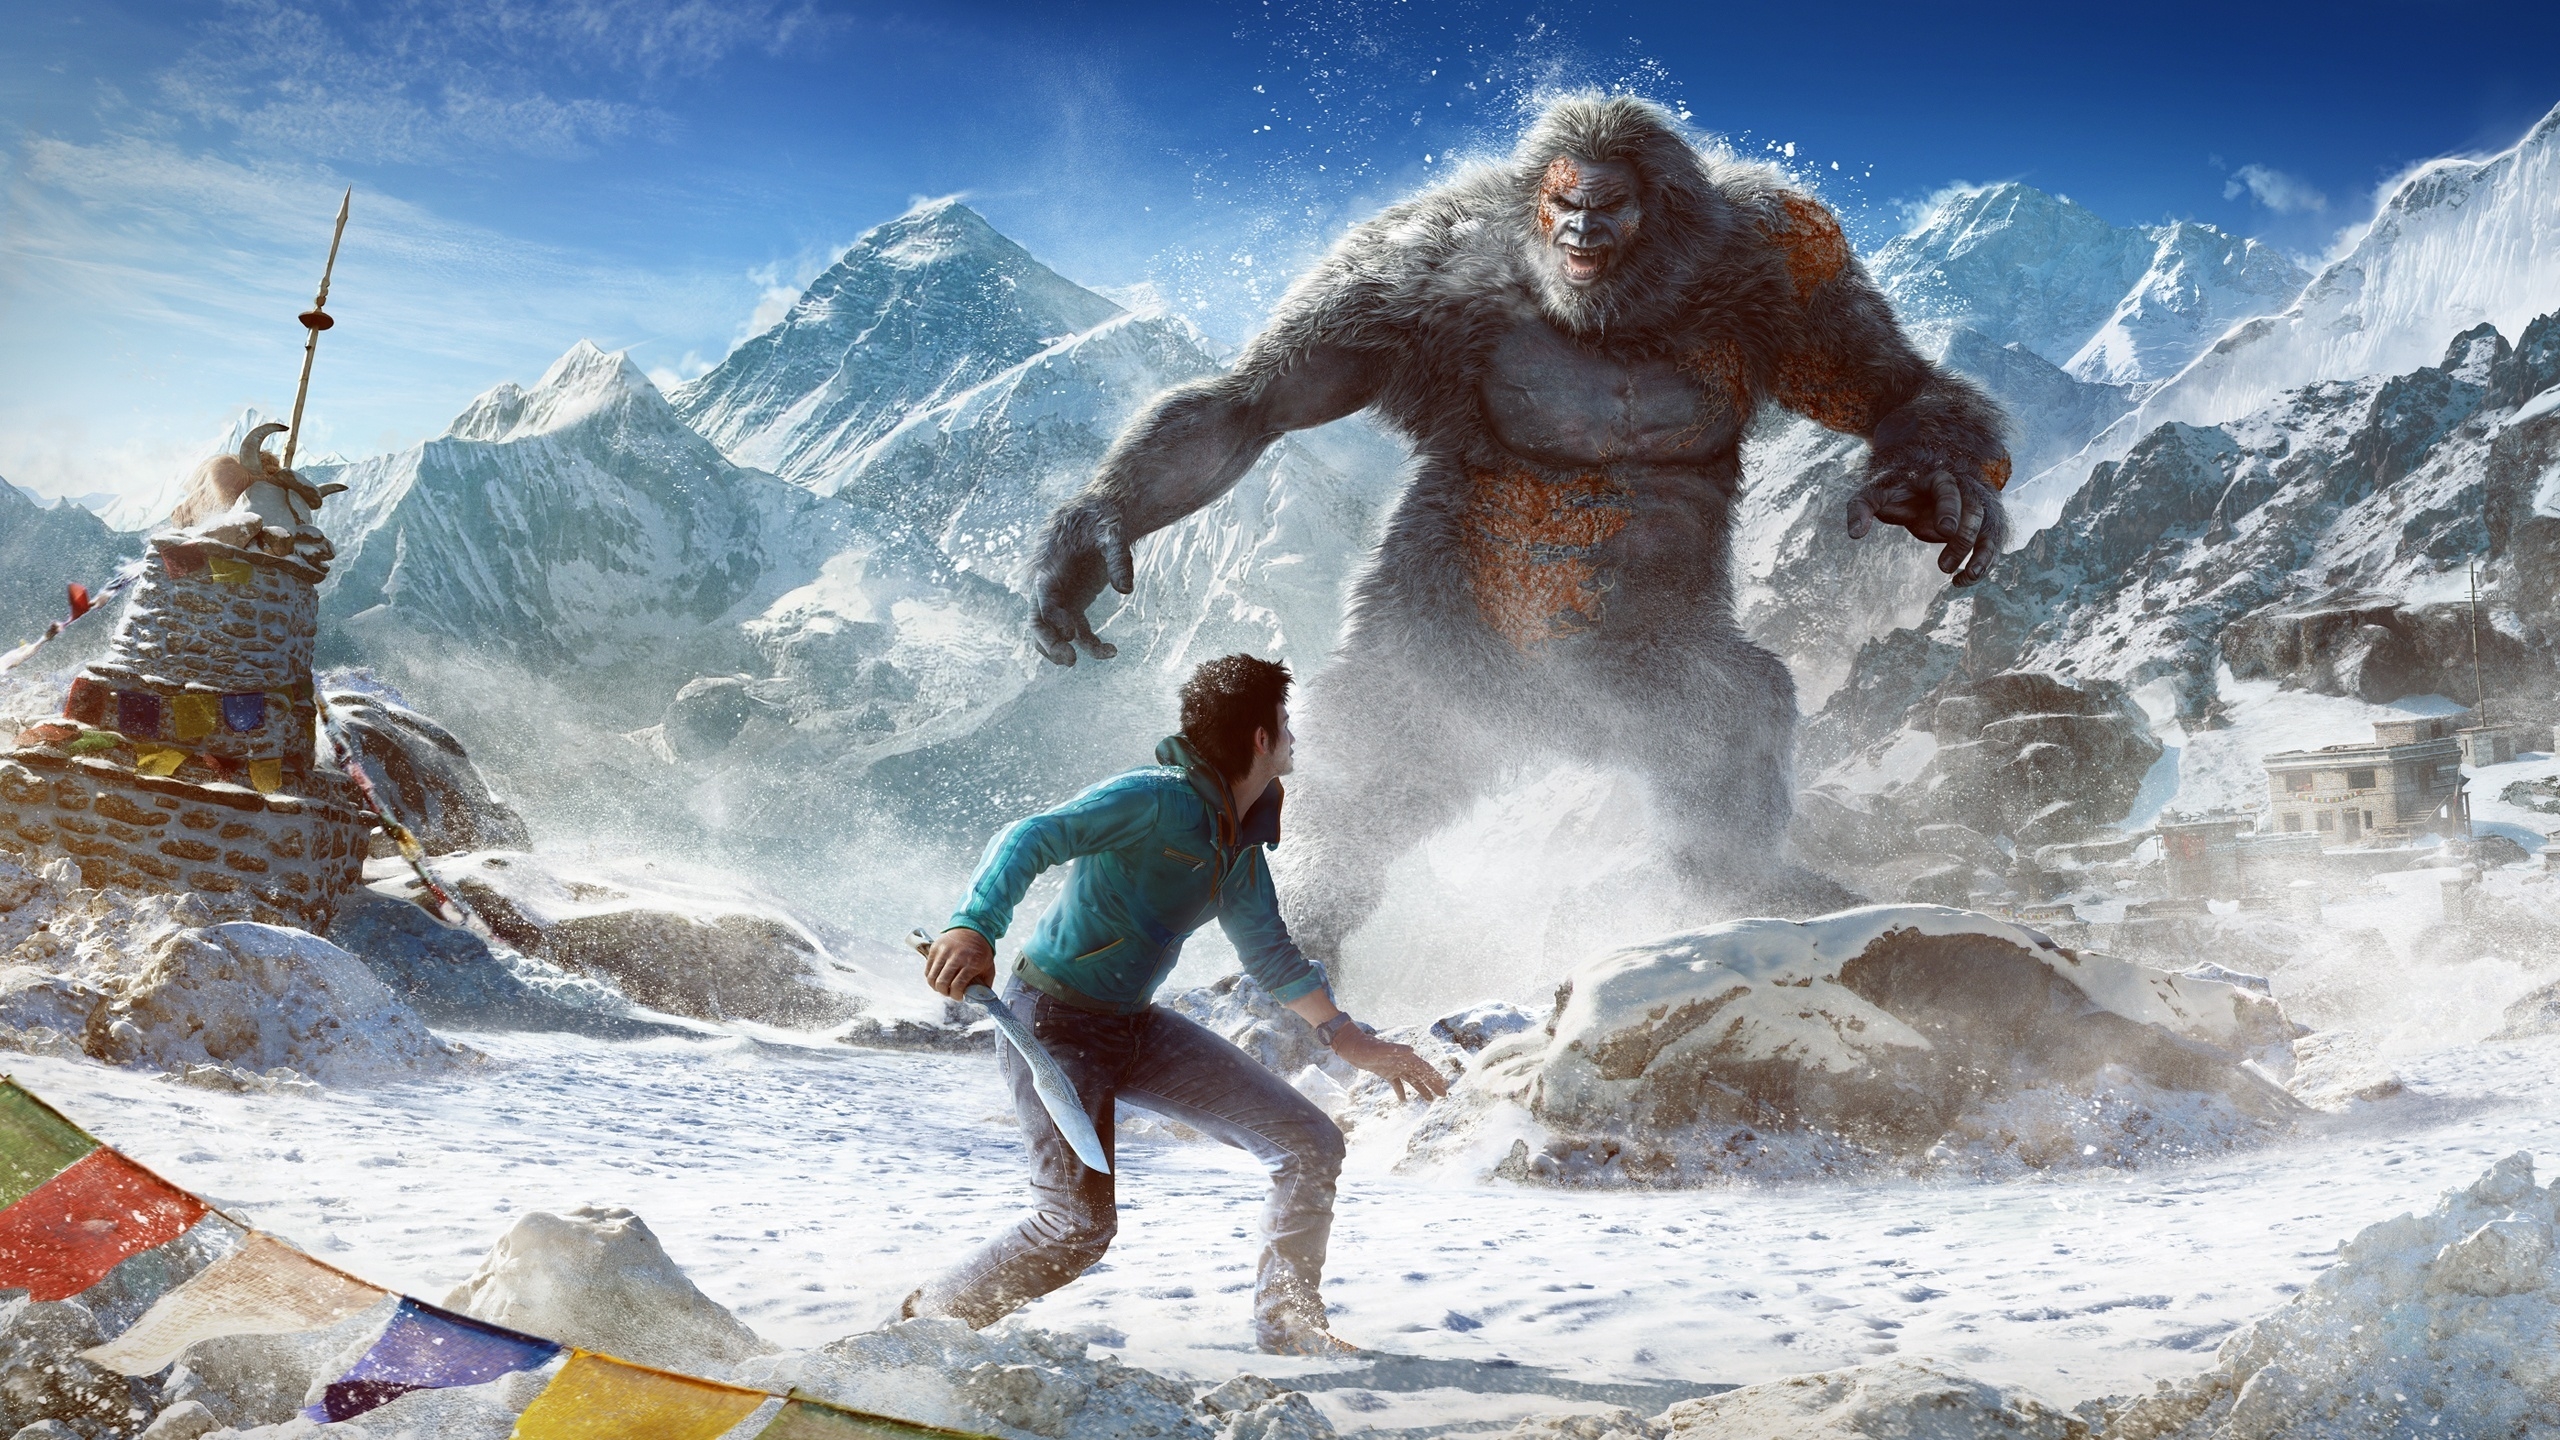 Far Cry 4 Valley of The Yetis for 2560x1440 HDTV resolution